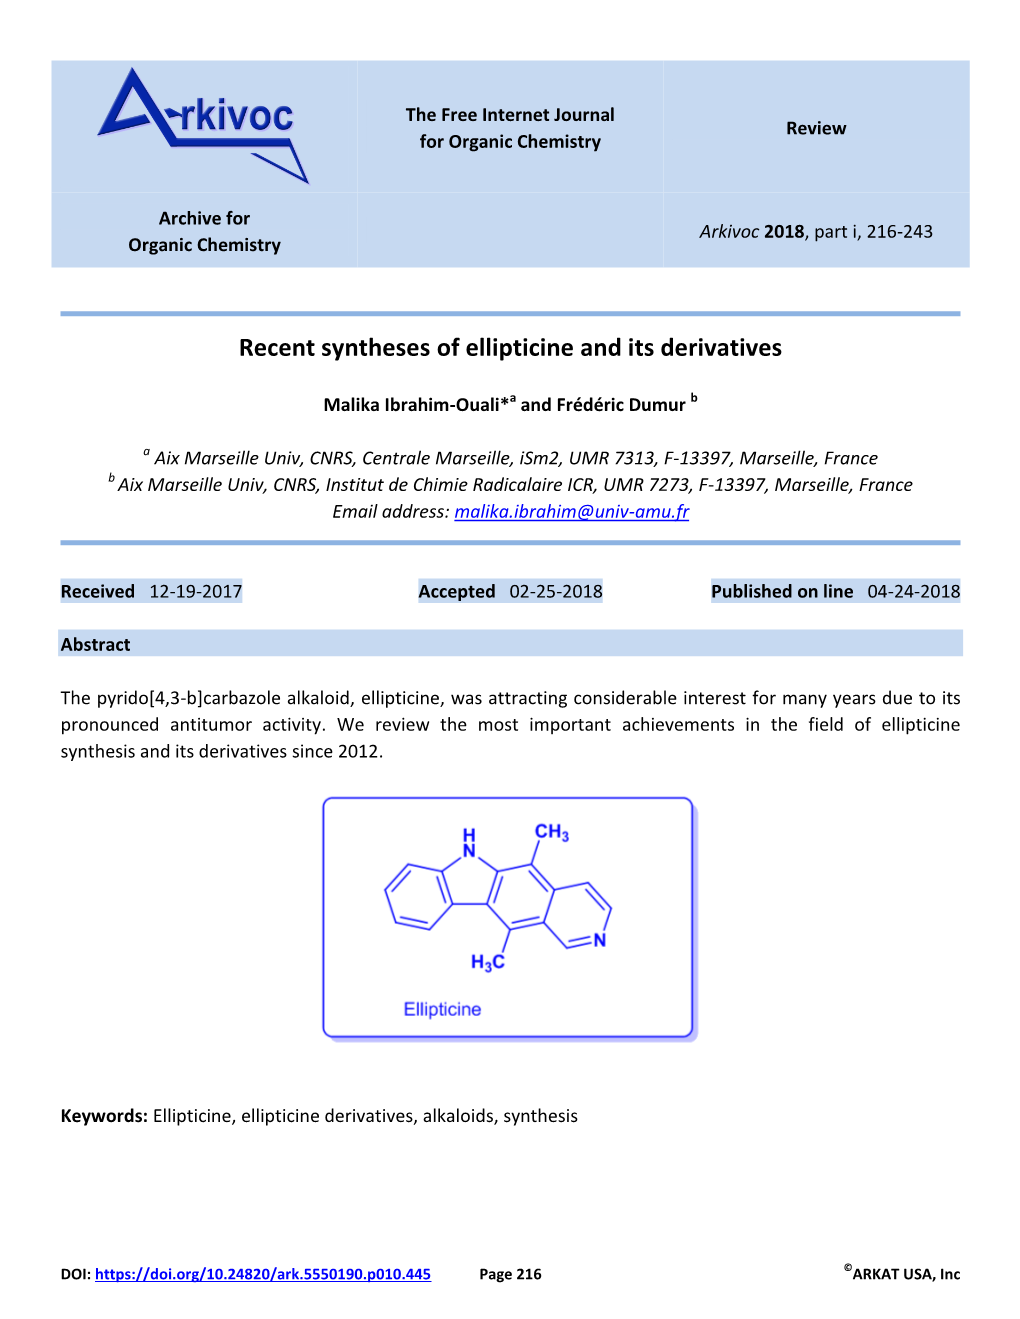 Recent Syntheses of Ellipticine and Its Derivatives